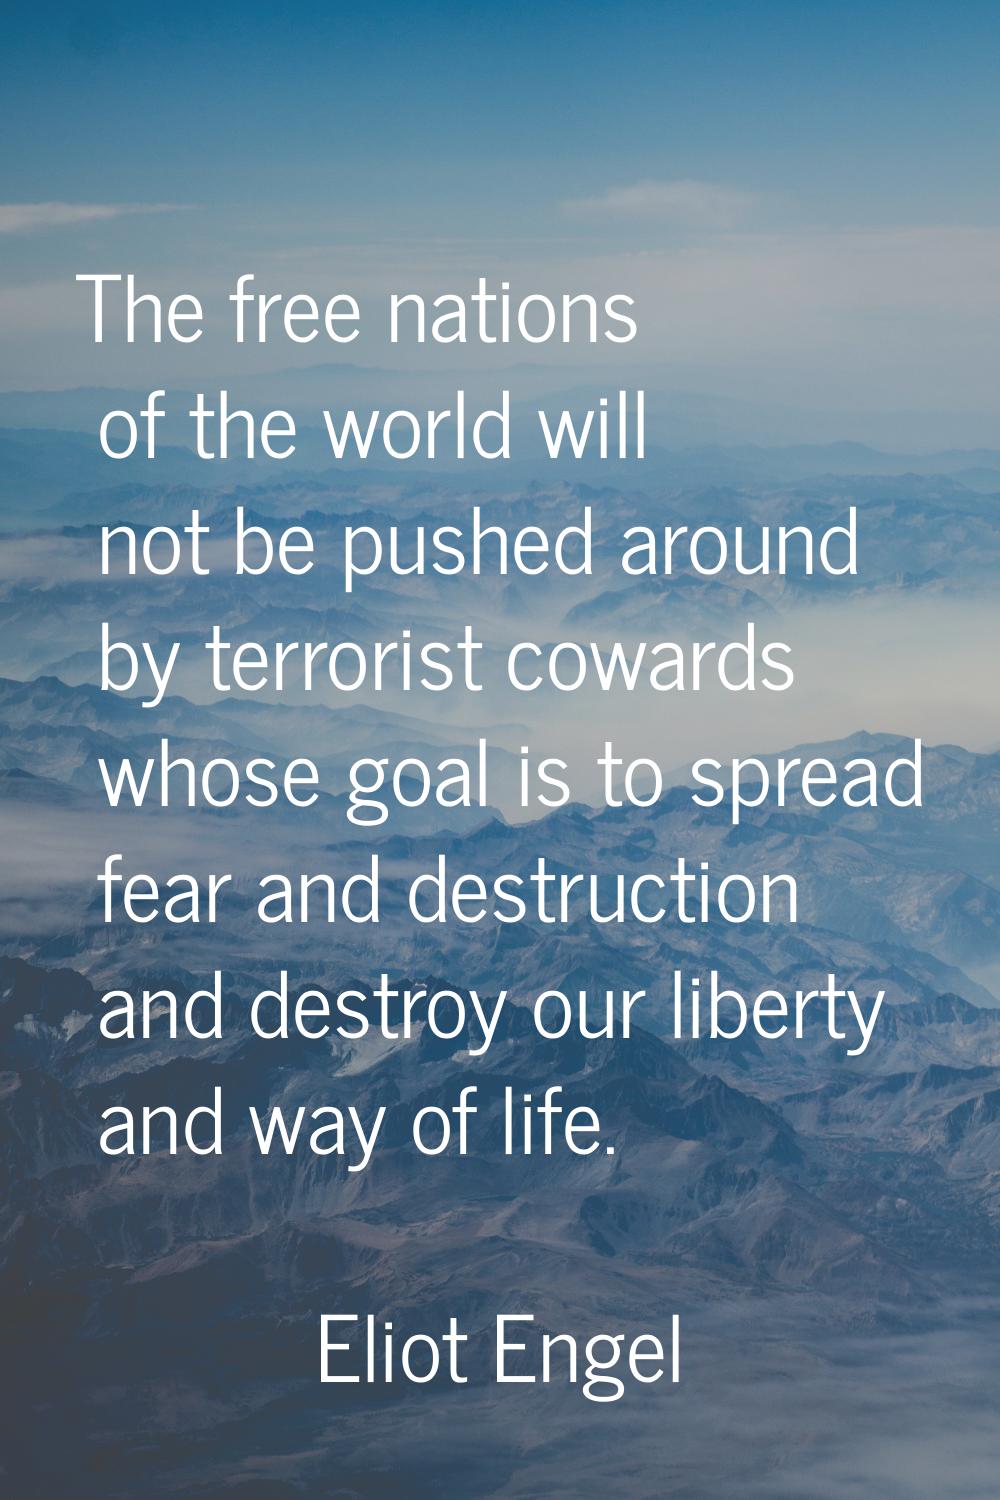 The free nations of the world will not be pushed around by terrorist cowards whose goal is to sprea